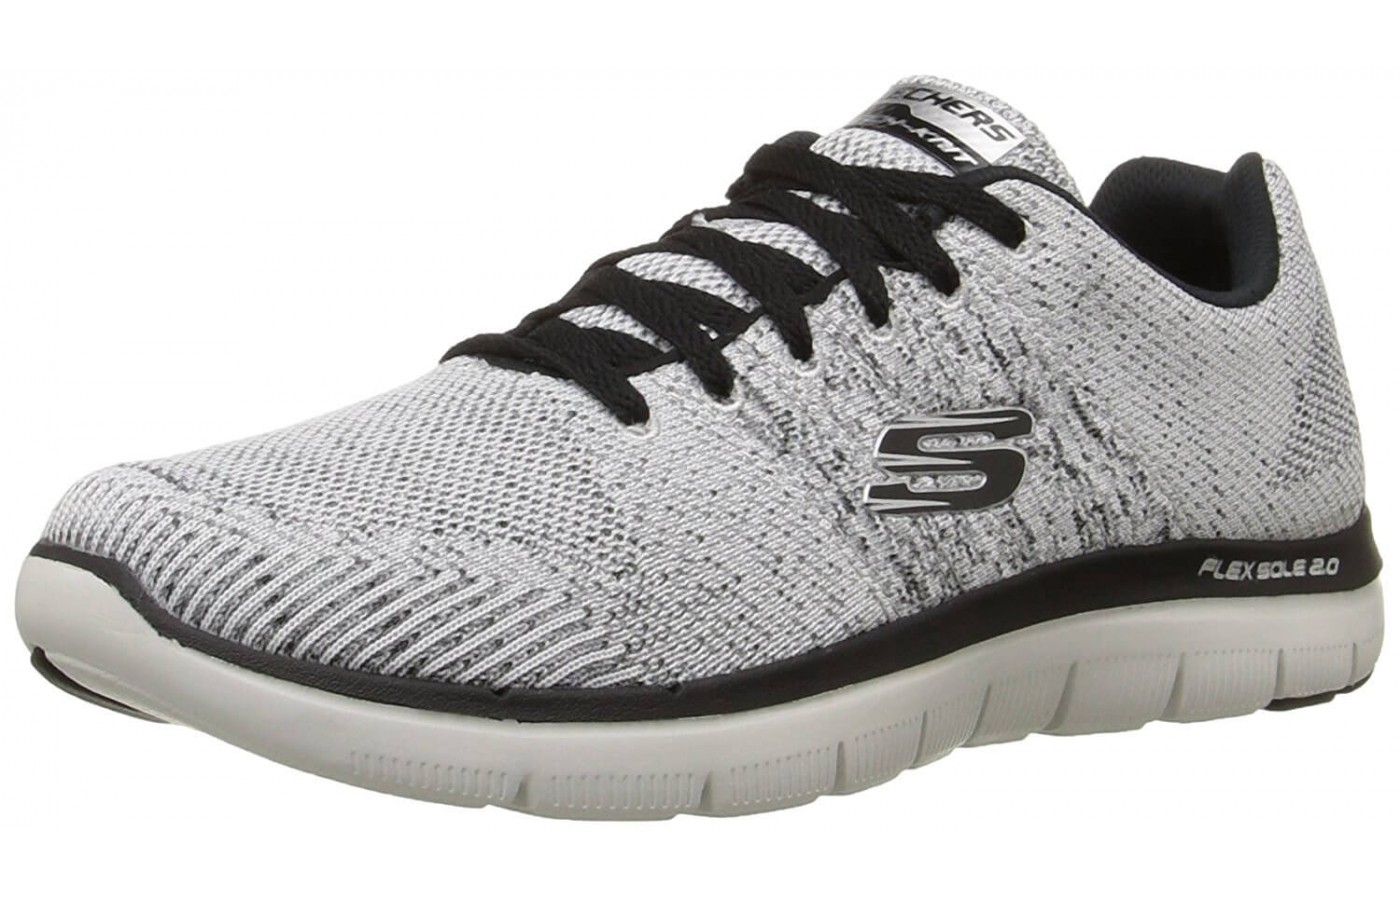 An angled view of the Skechers Flex Advantage 2.0.